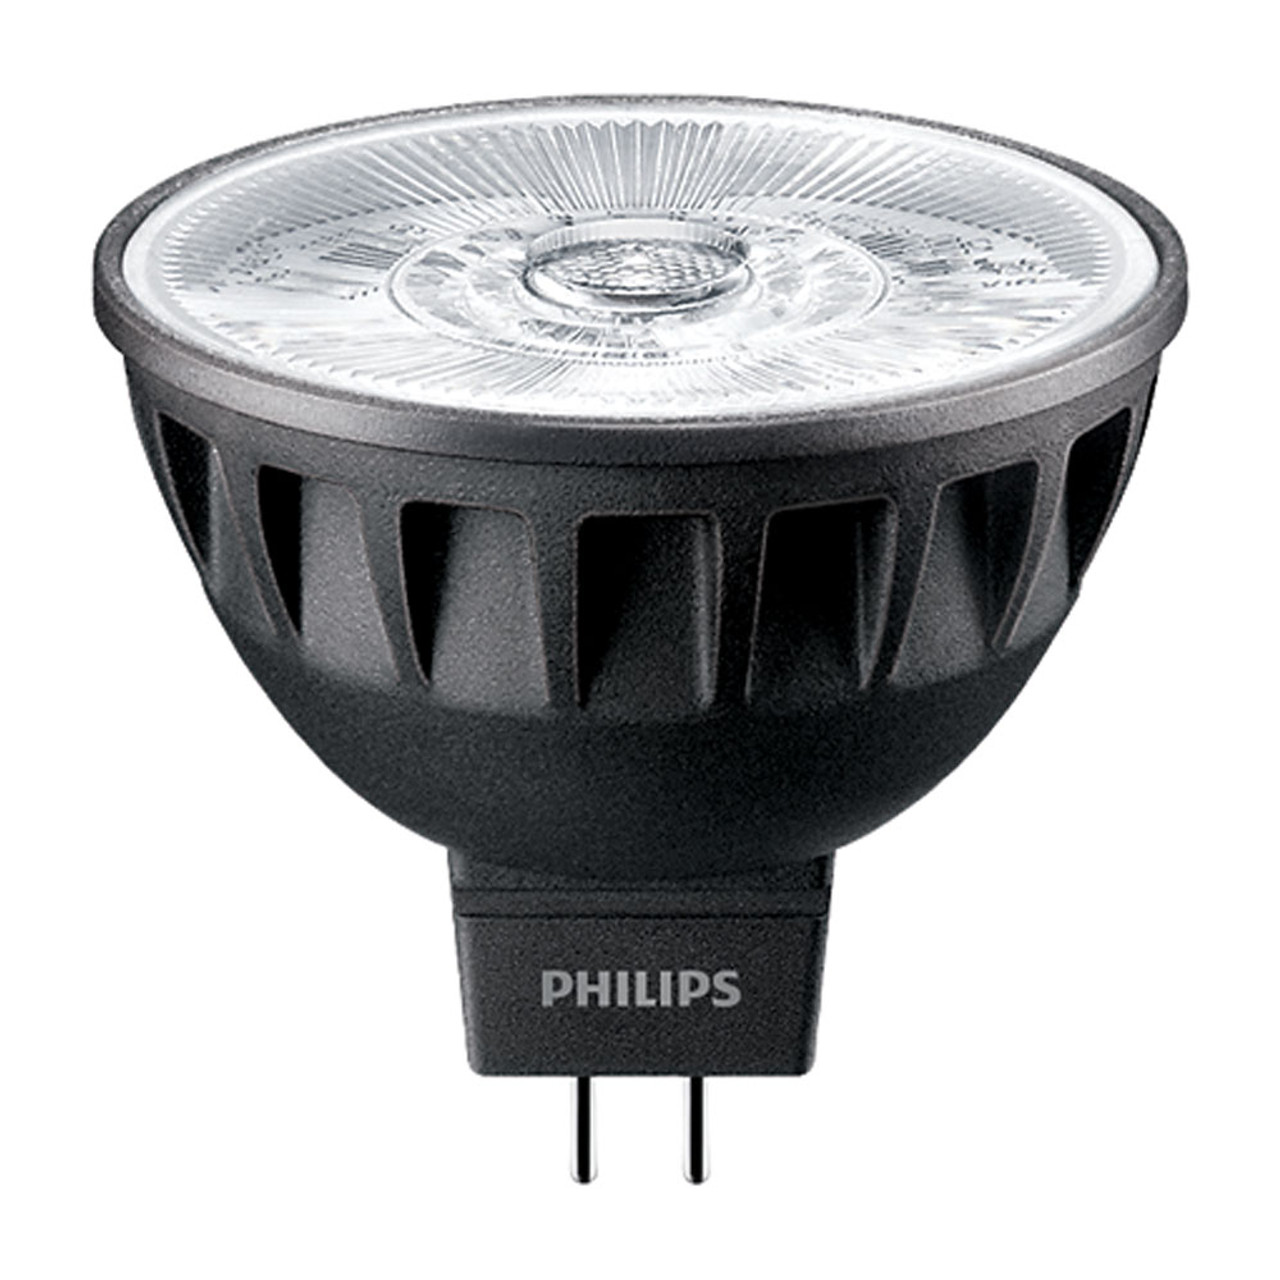 Philips Master LED 12V 6.7W (35W) Cool White 24 Degrees Dimmable RA97